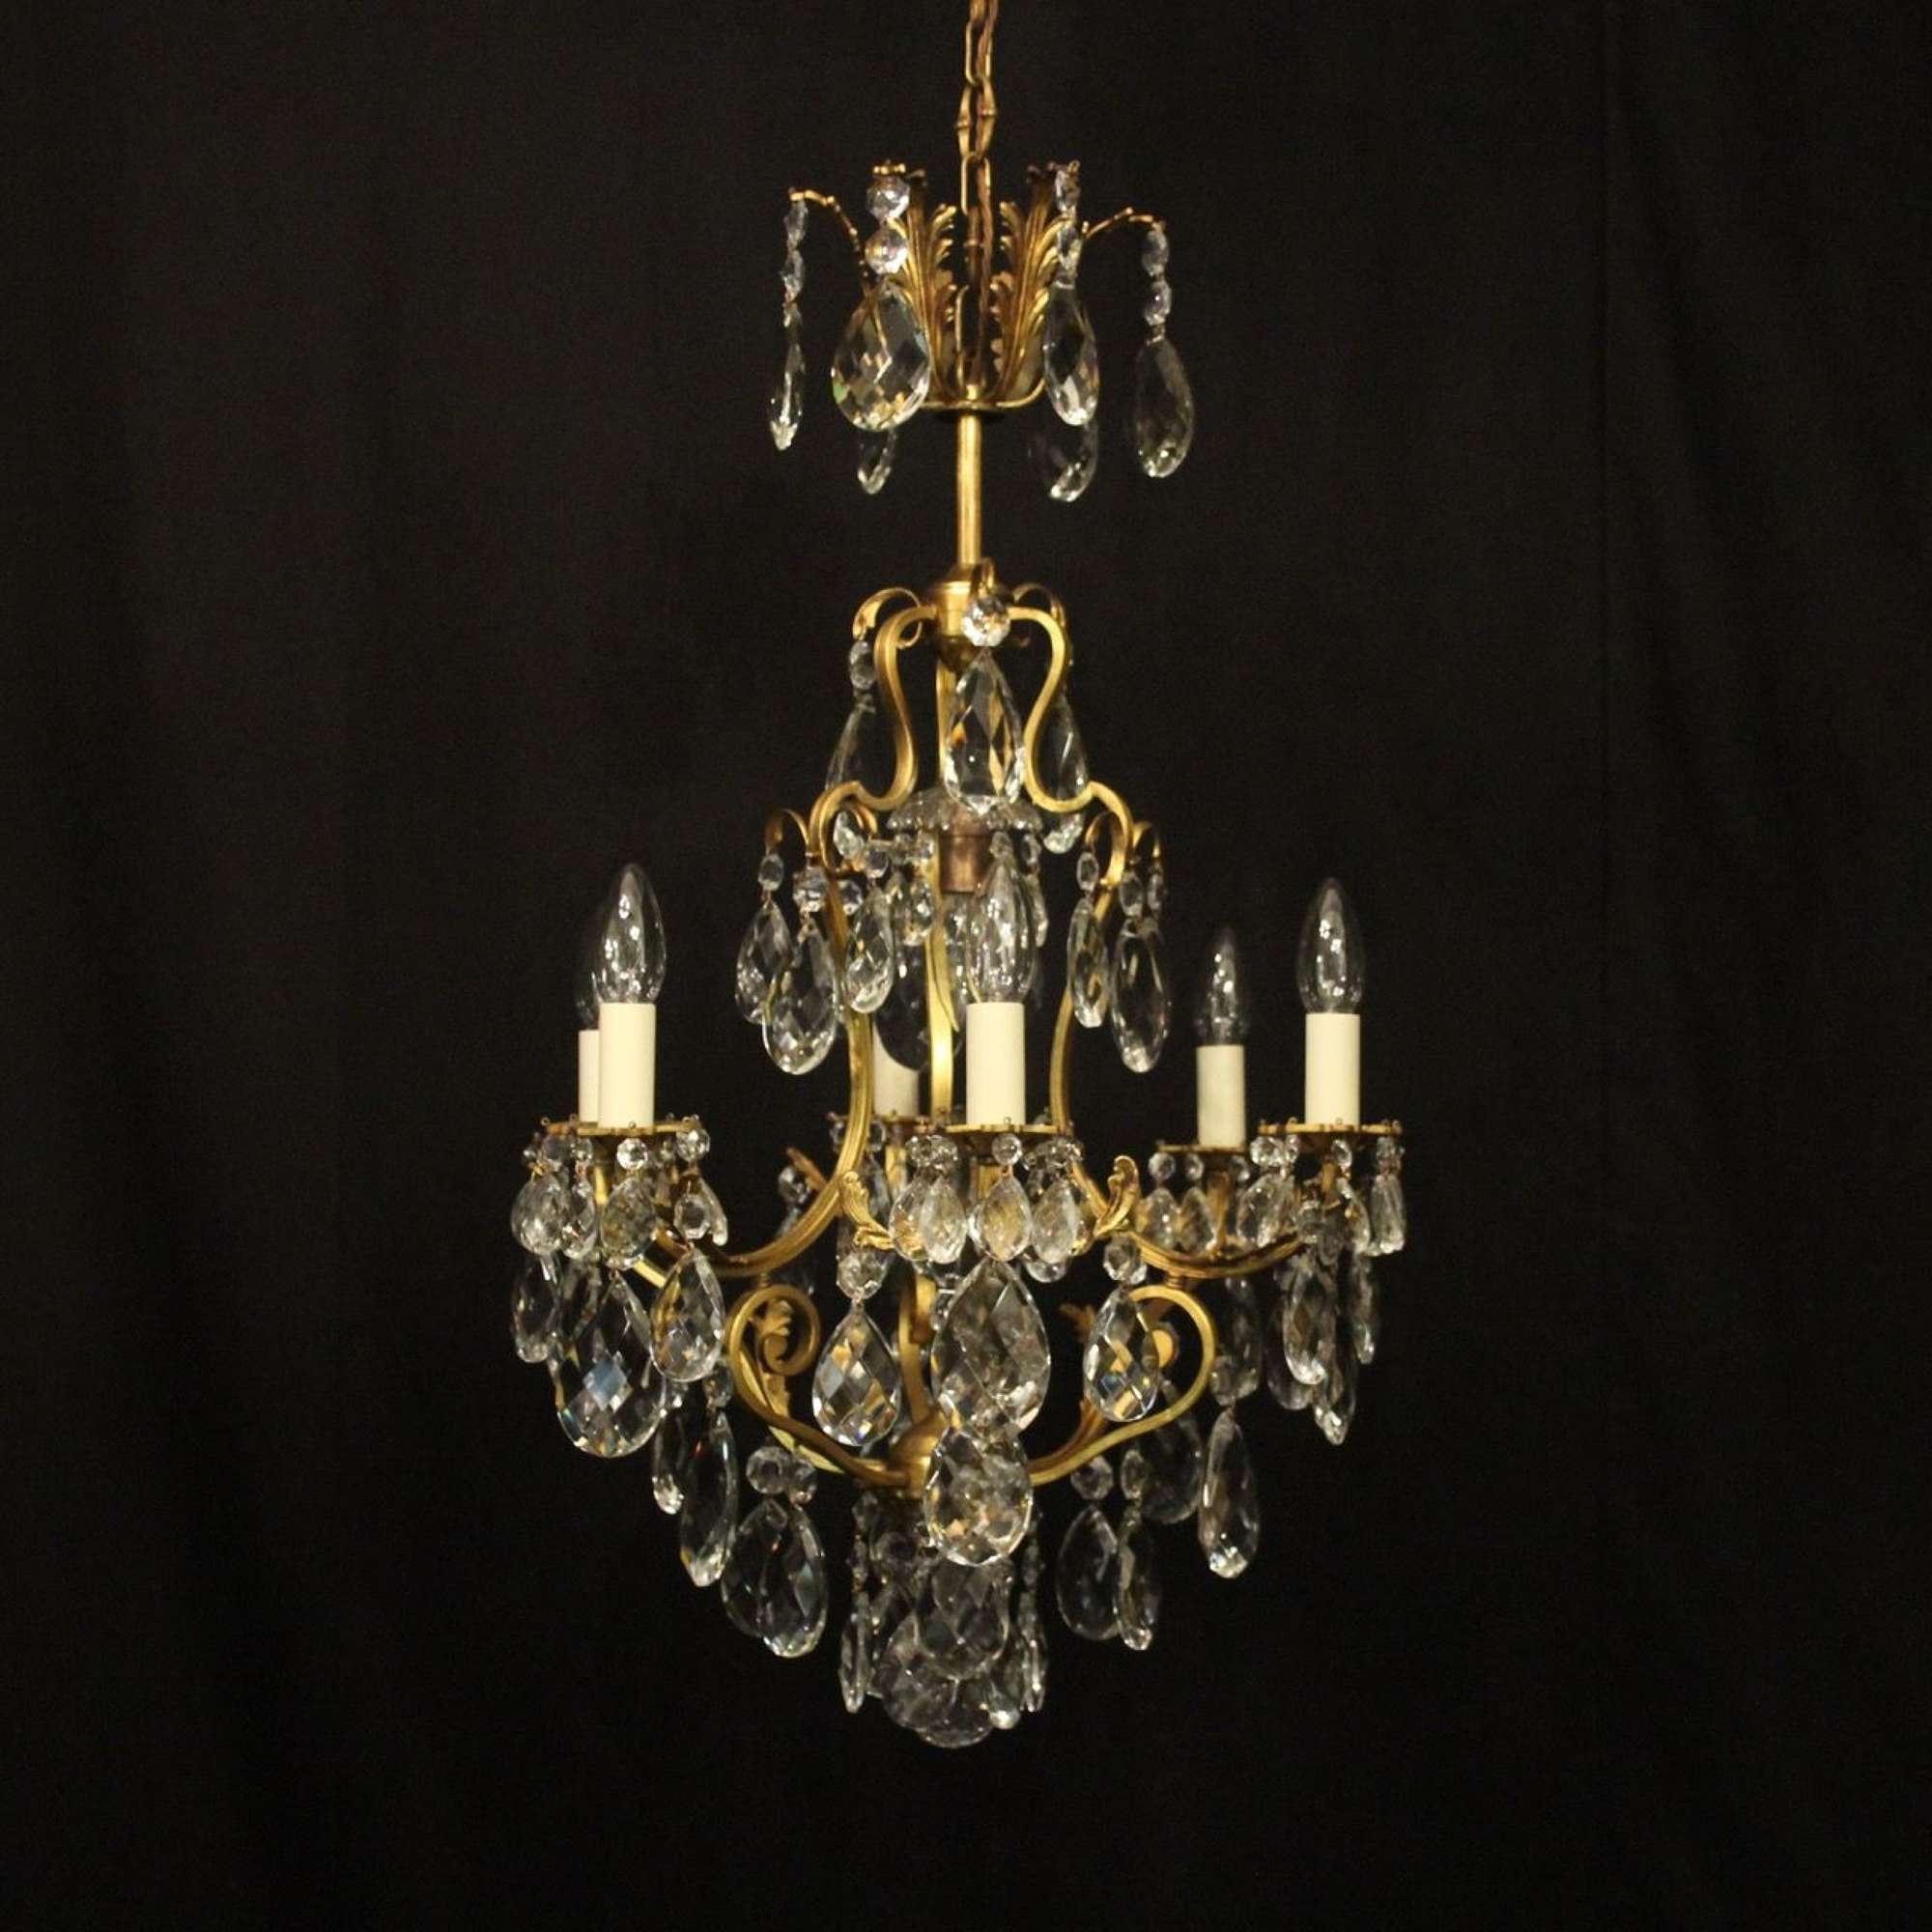 French Gilded Birdcage Antique Chandelier